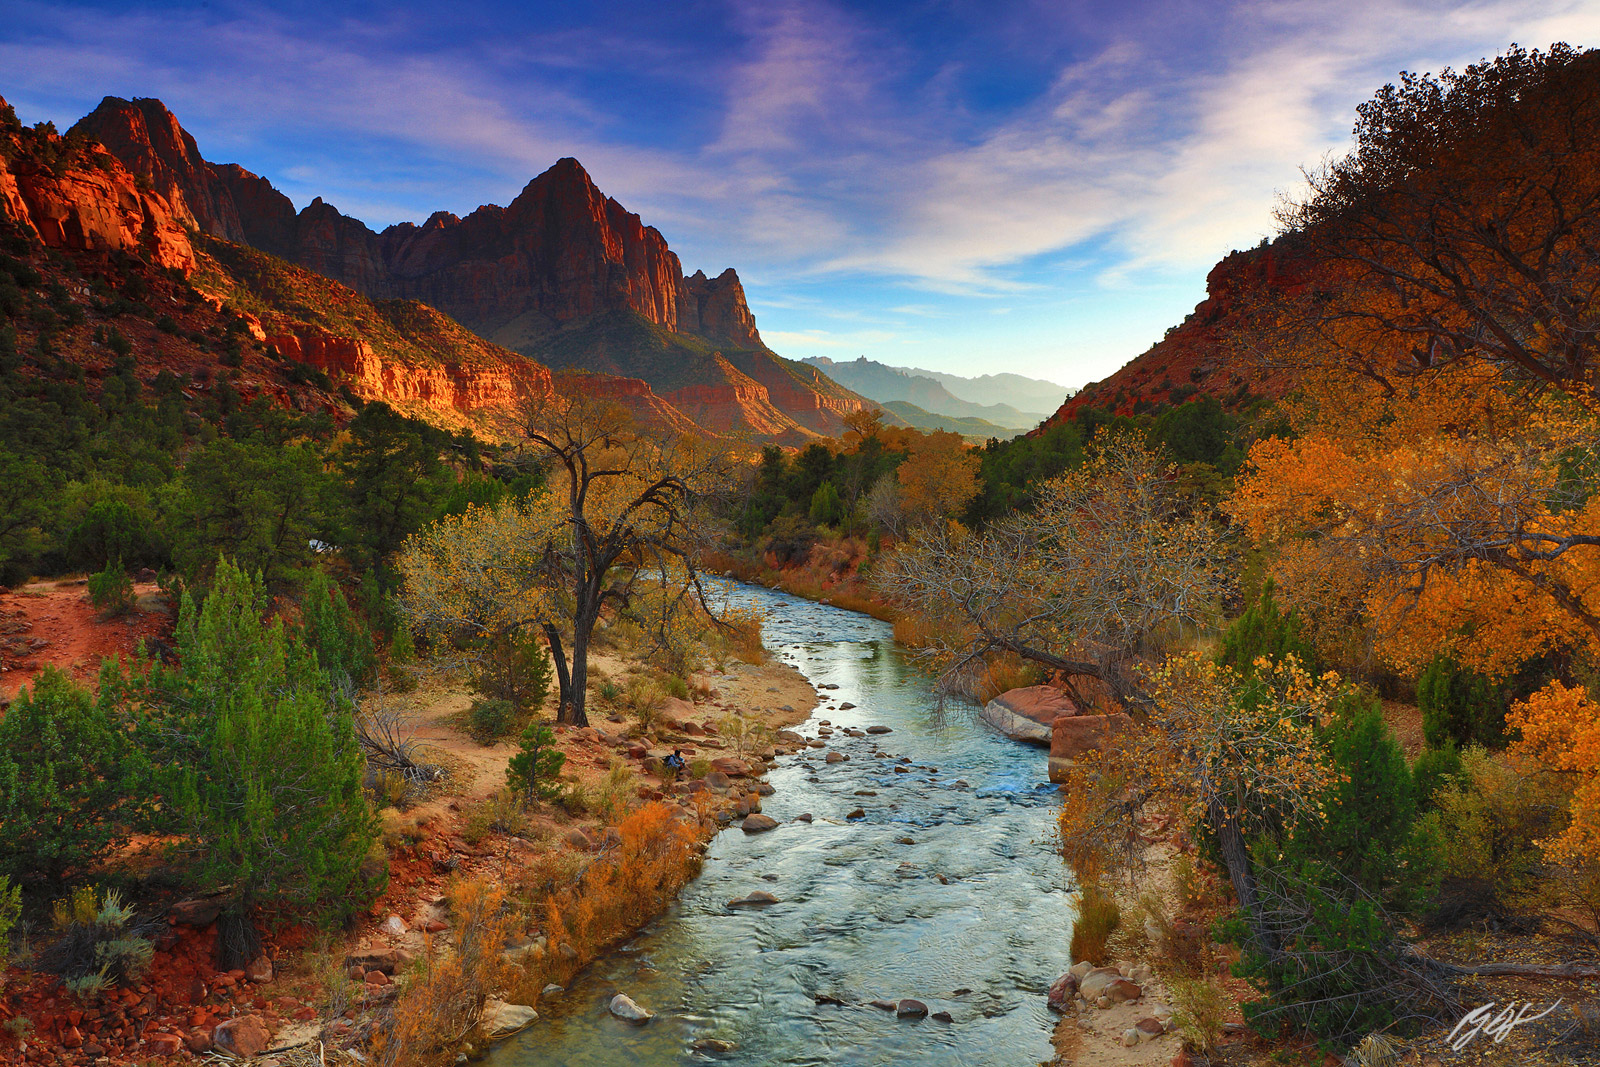 The Virgin River and the Watchman in Zion National Park in Utah